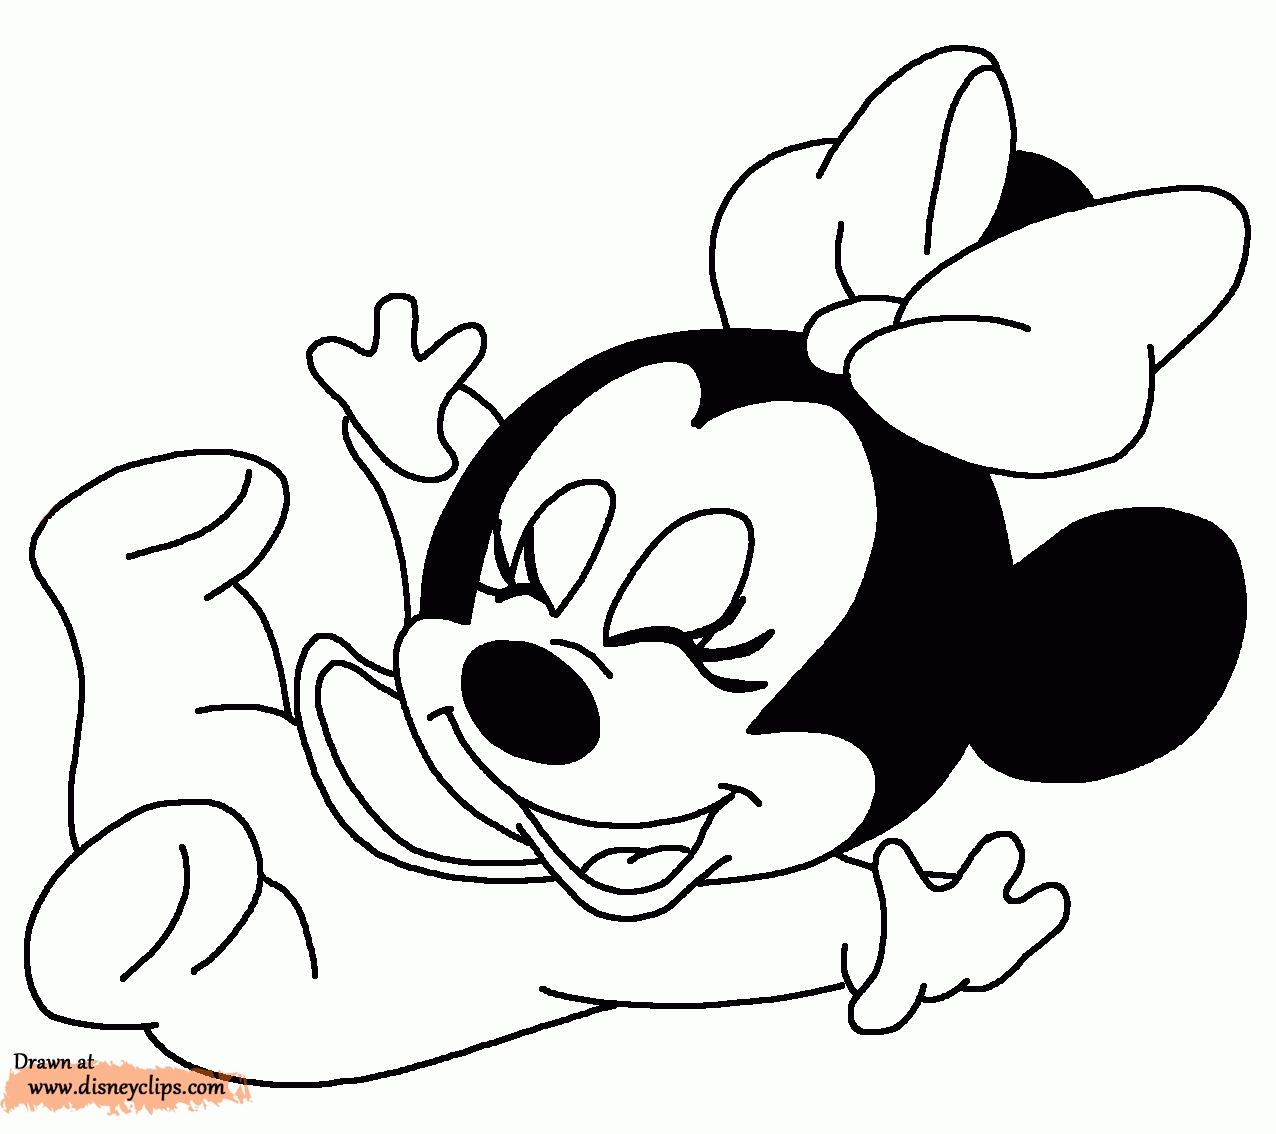 First Paper Ba Disney Coloring Pages To Download And Print For ...